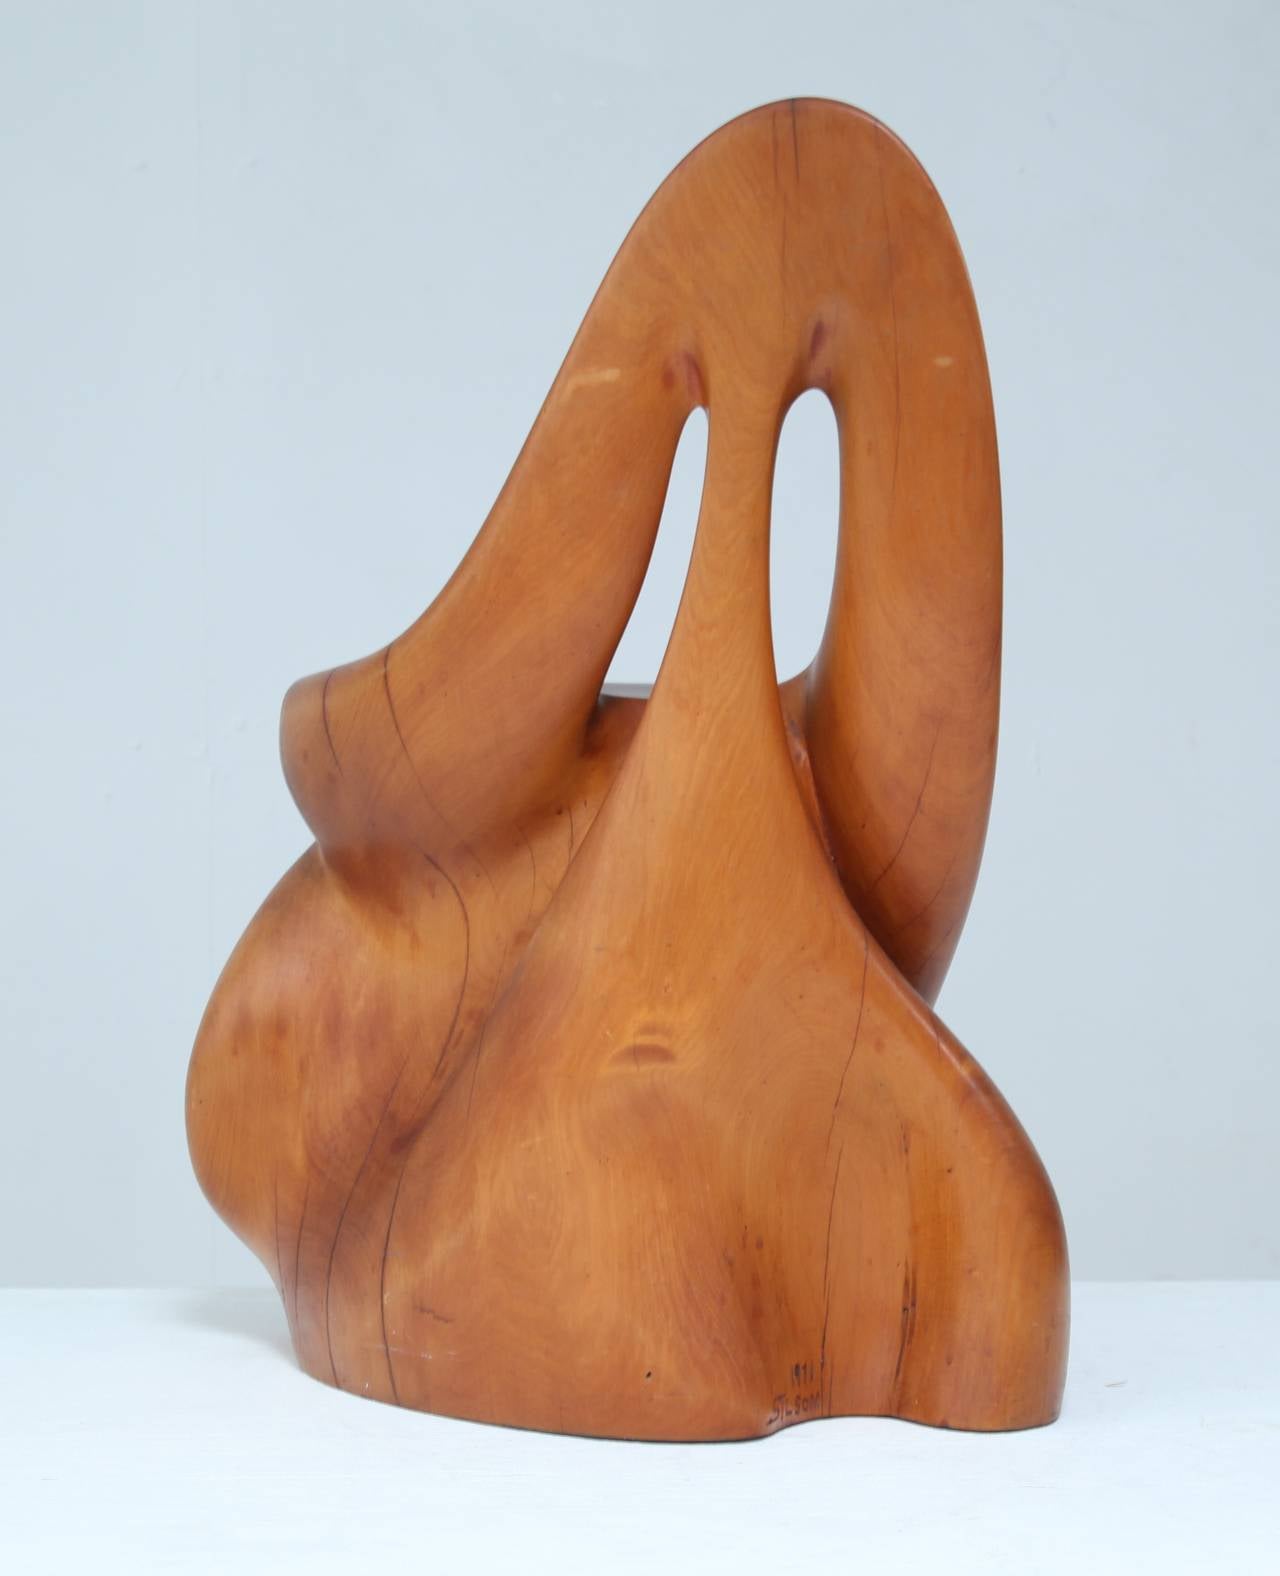 A small, highly sculptural stool or children's chair, shaped like a tree trunk. This unique piece is made of New Zealand kauri wood and is both a rustic looking chair and a beautiful object.